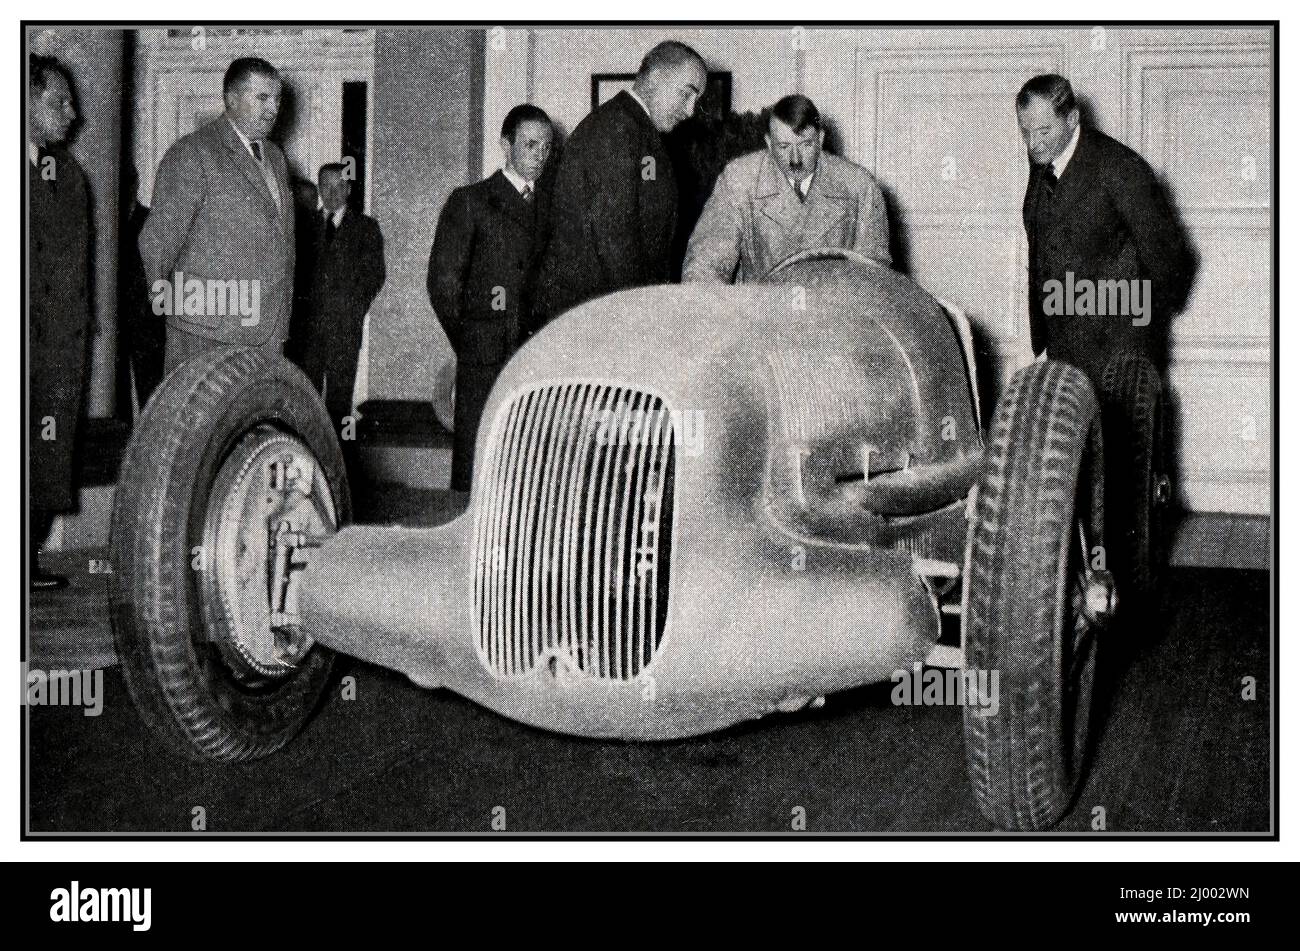 1930s Adolf Hitler MERCEDES racing car with Joseph Goebbels at the launching of the new Mercedes open Grand Prix racing car 'Silver Arrow' model number W24 1934 Also in group Hans Nibel Mercedes designer. Stock Photo